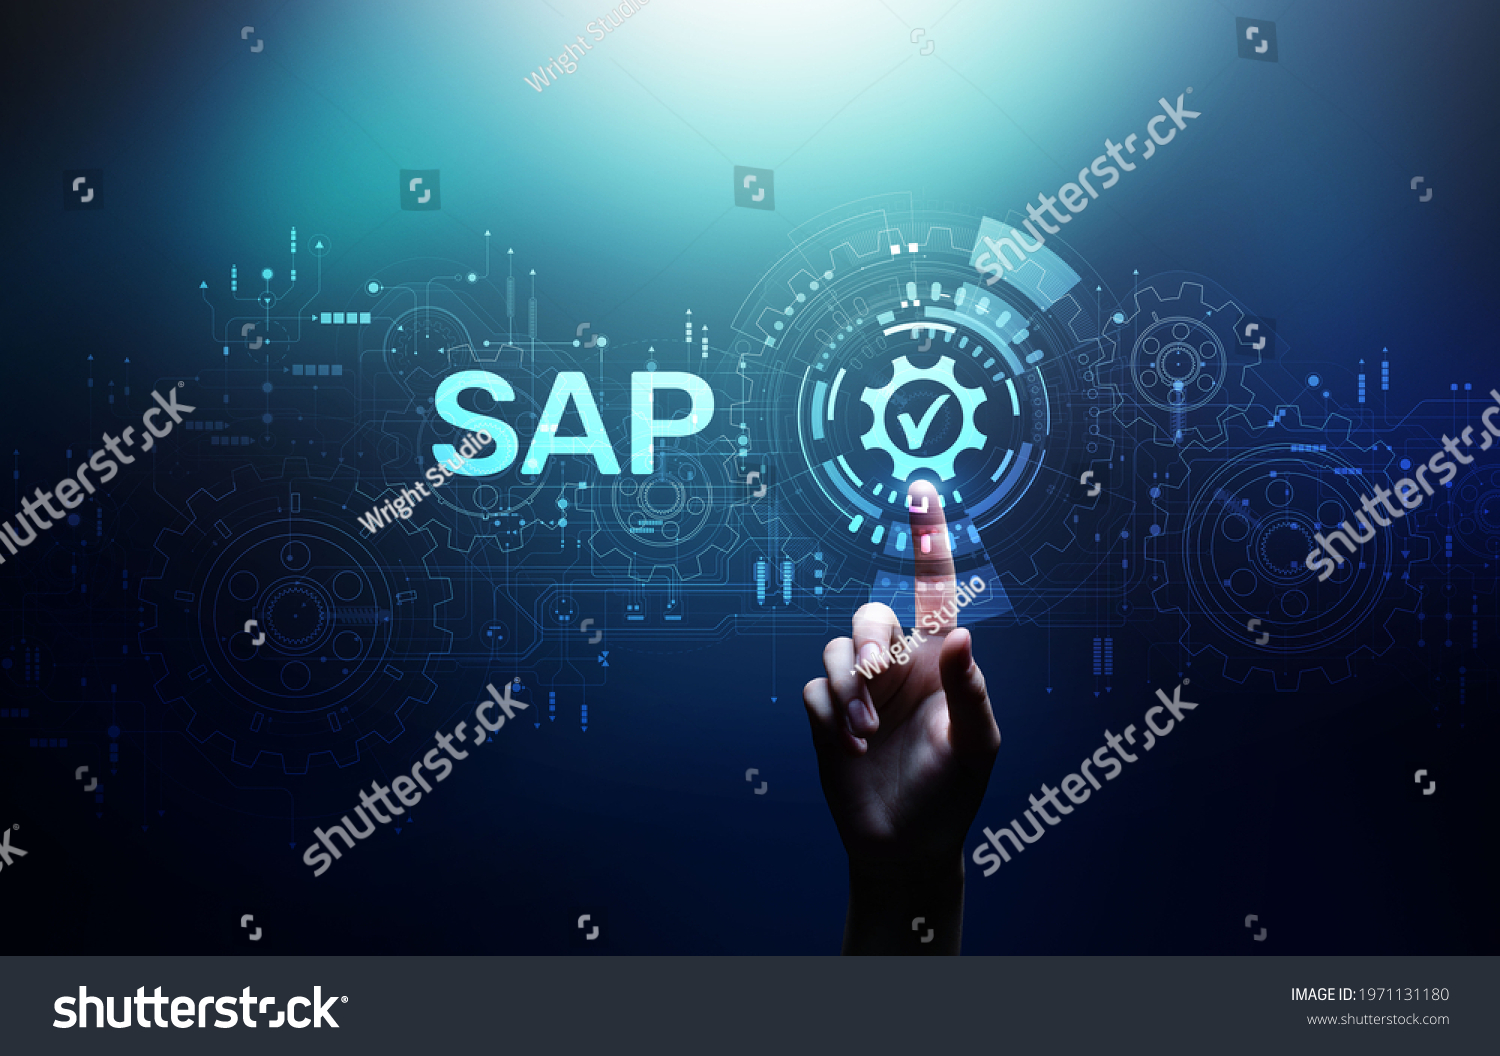 sap-software-business-process-automation-erp-stock-photo-1971131180